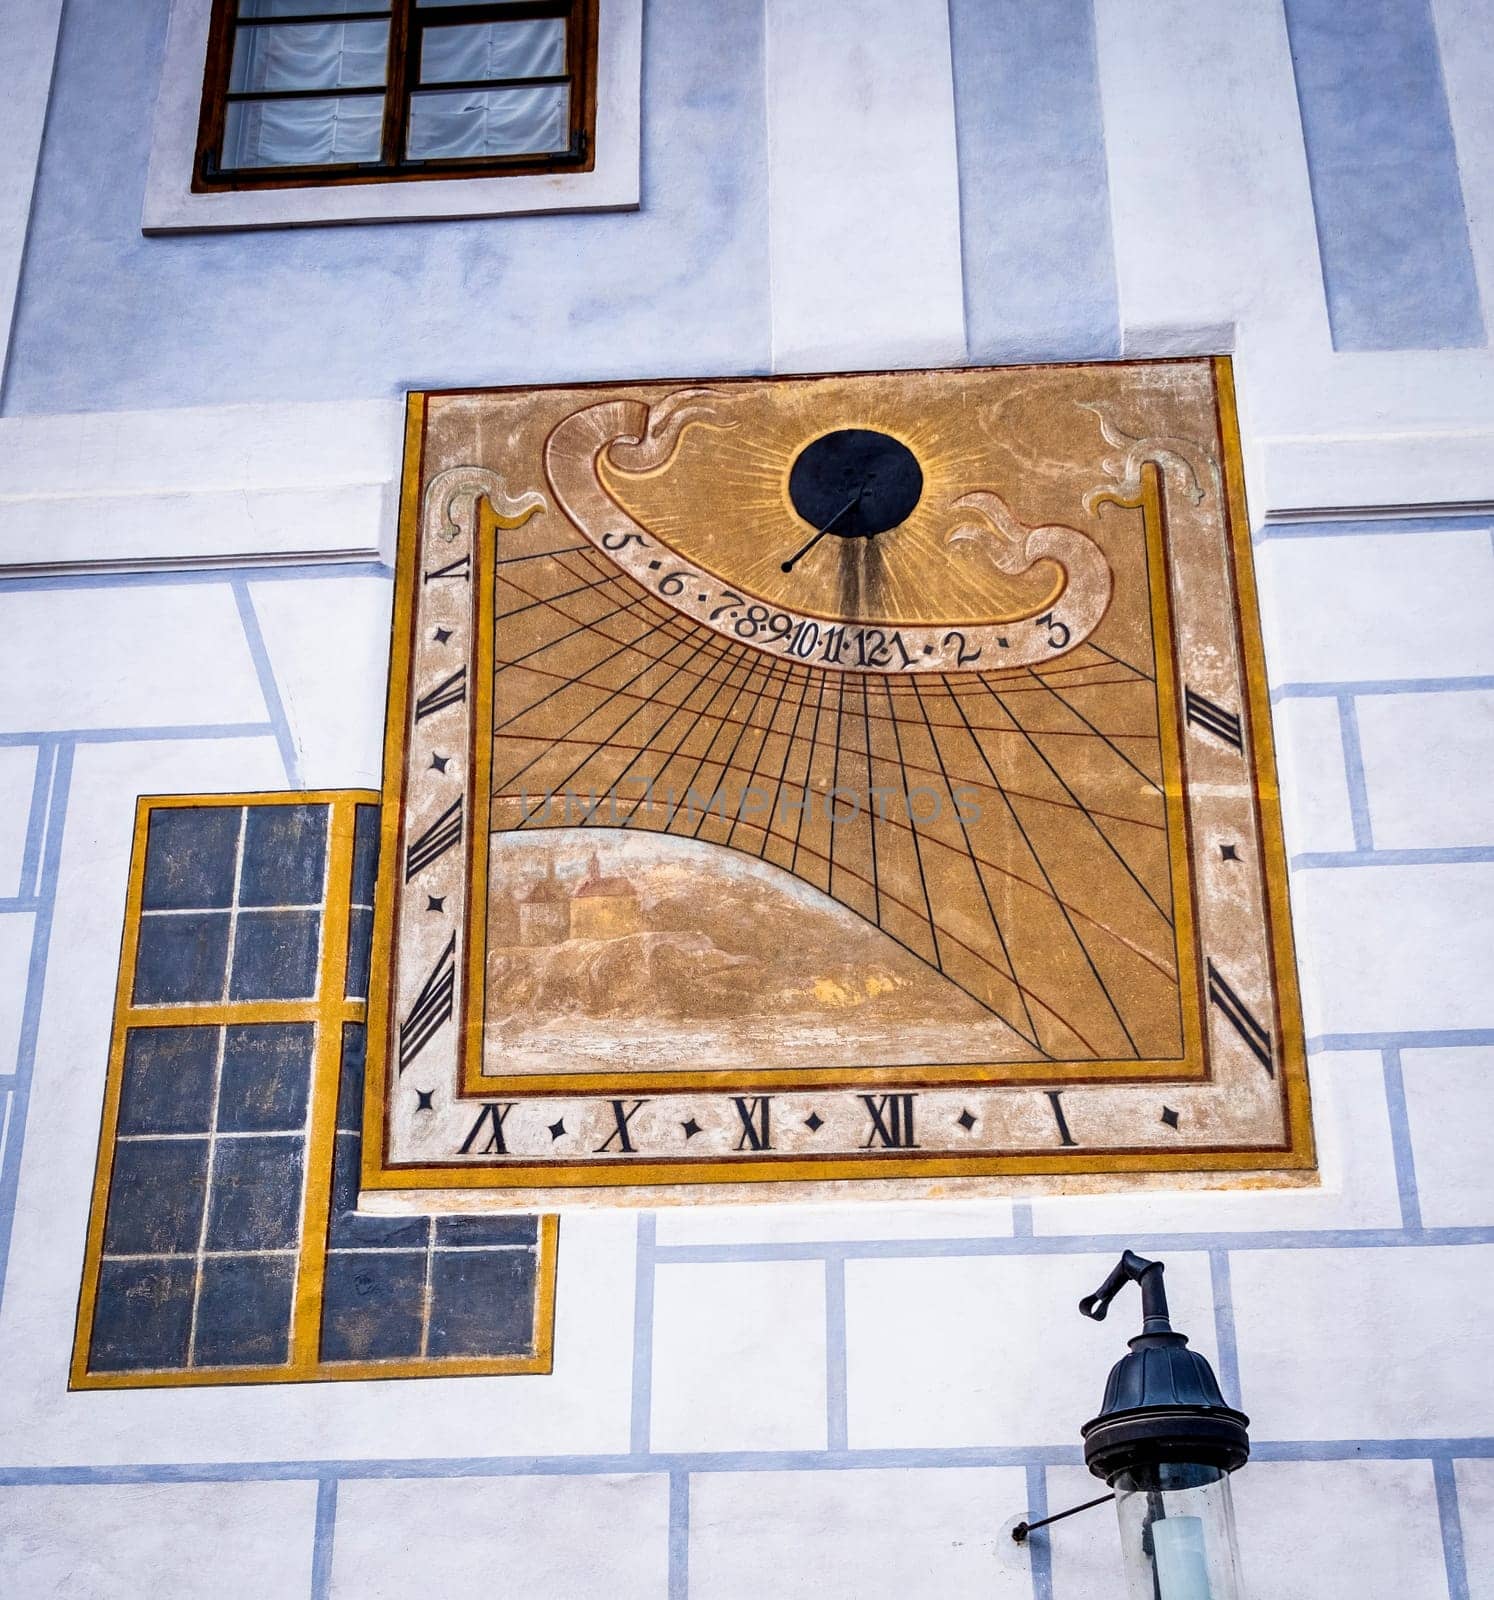 Anchient painted sun clock on the wall in Cesky Krumlov